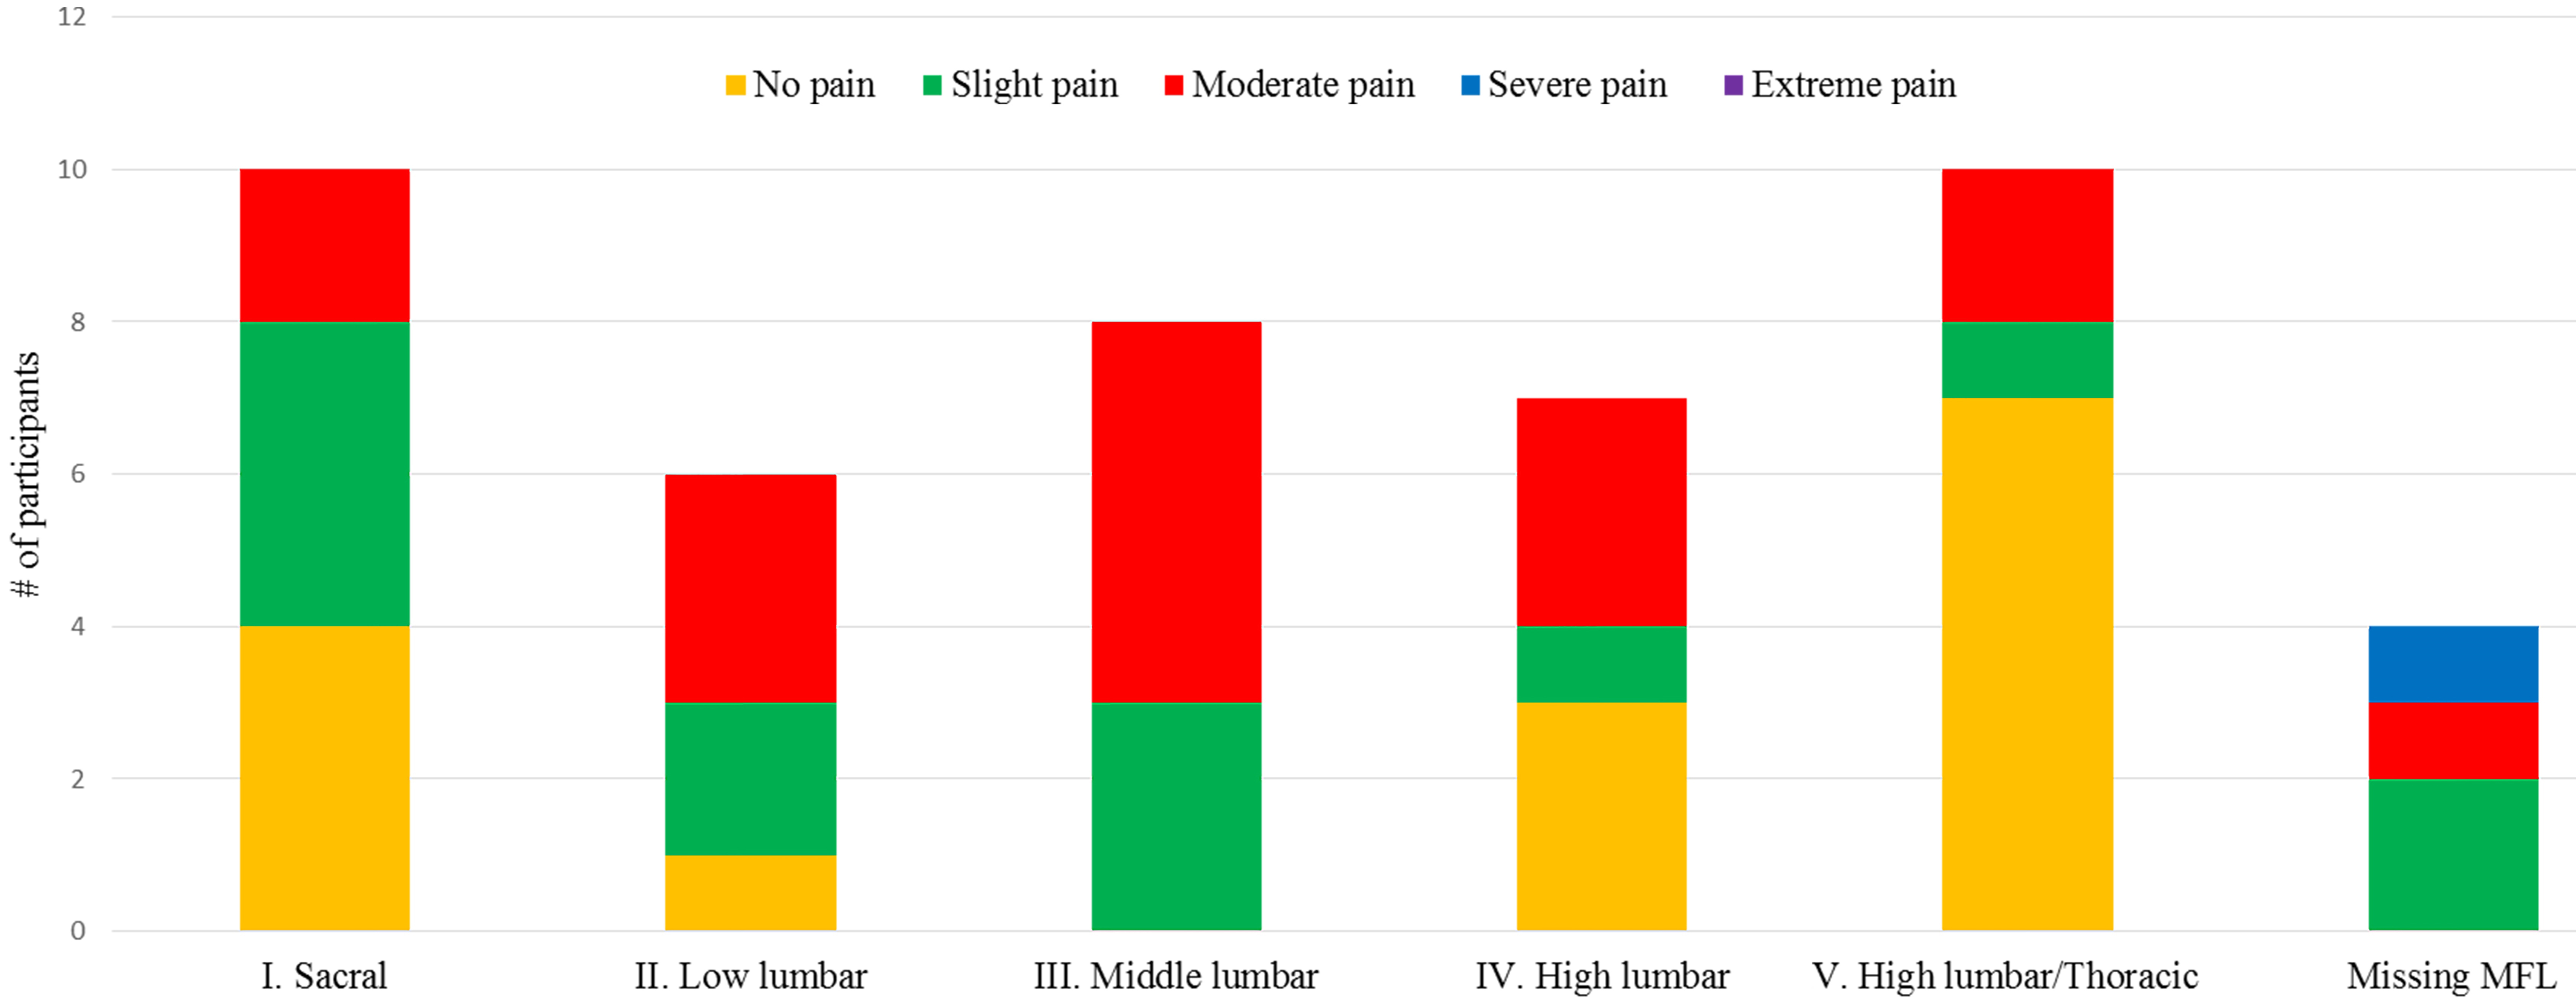 Self-reported severity of current pain in relation to muscle function level.